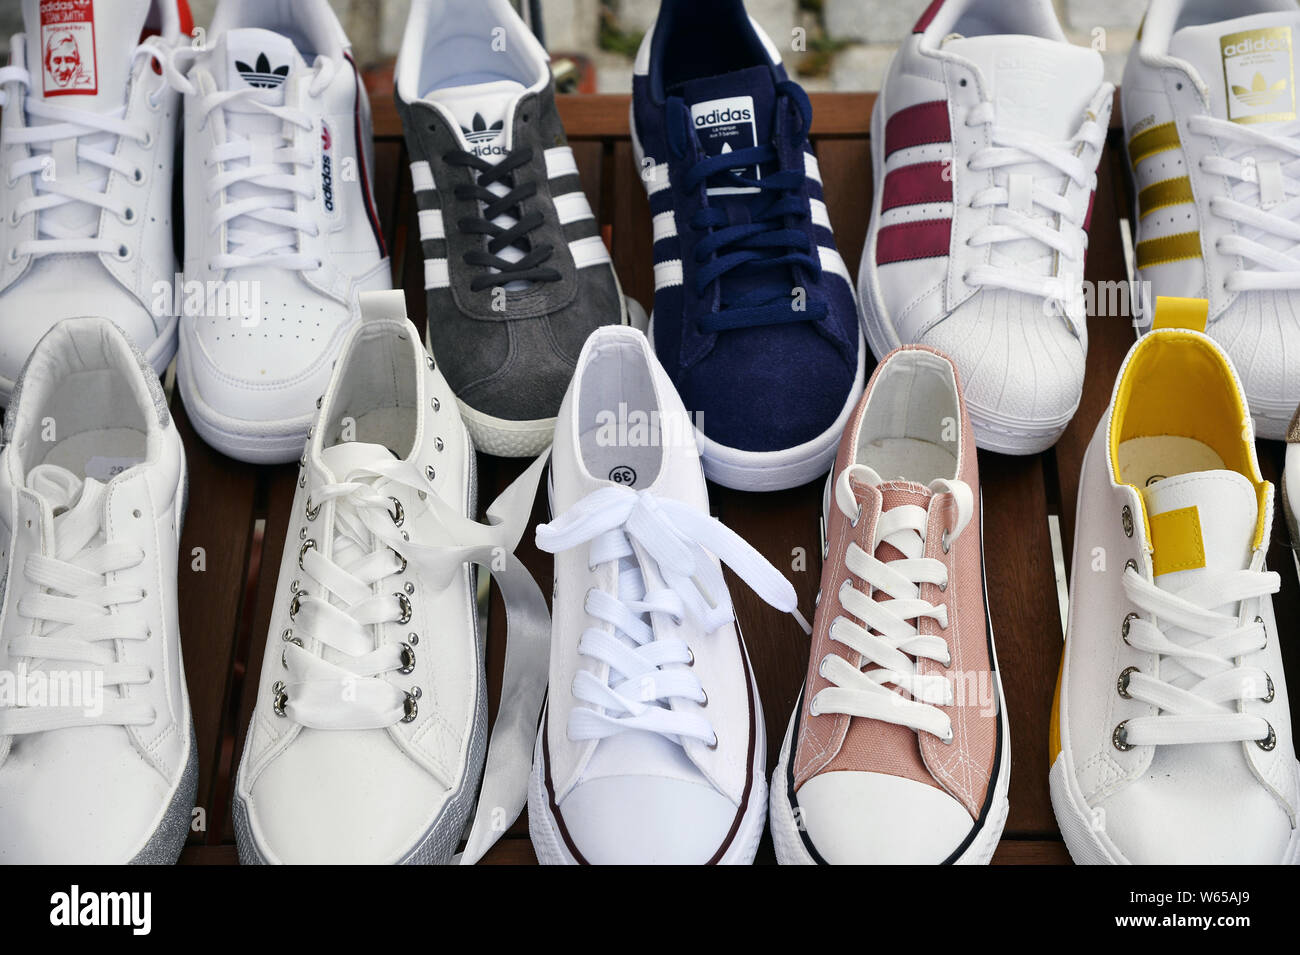 Sport Shoes Display High Resolution Stock Photography and Images - Alamy